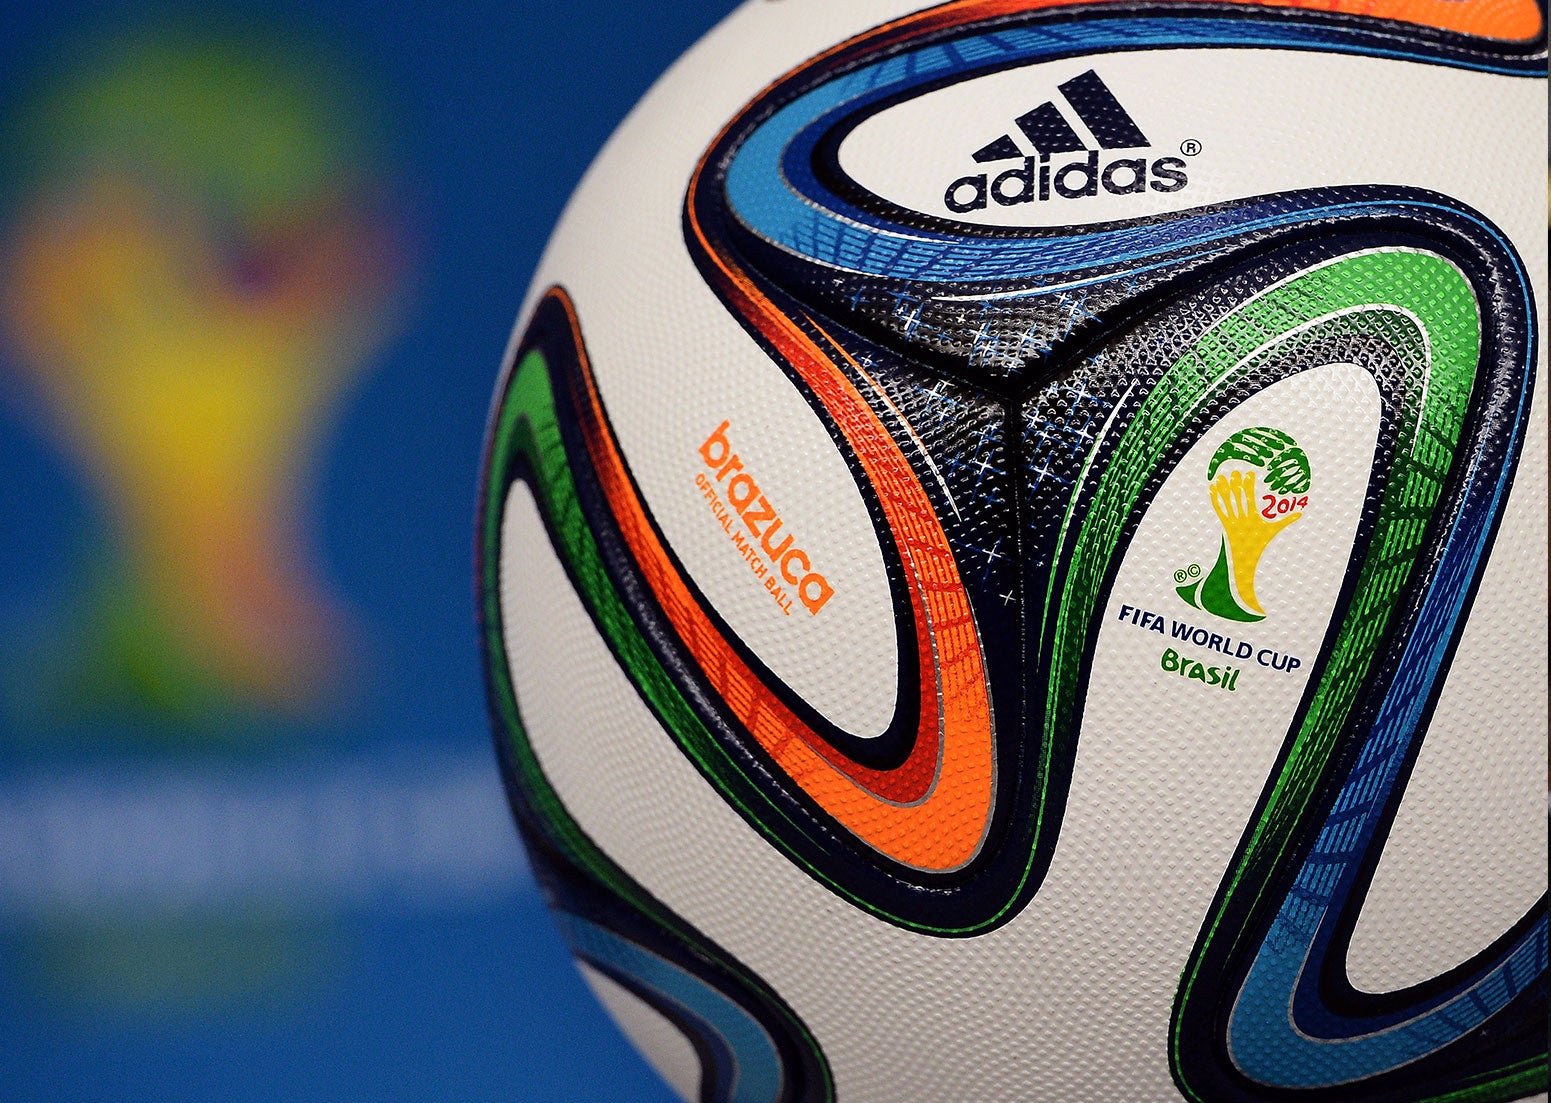 Adidas was one of the World Cup sponsors